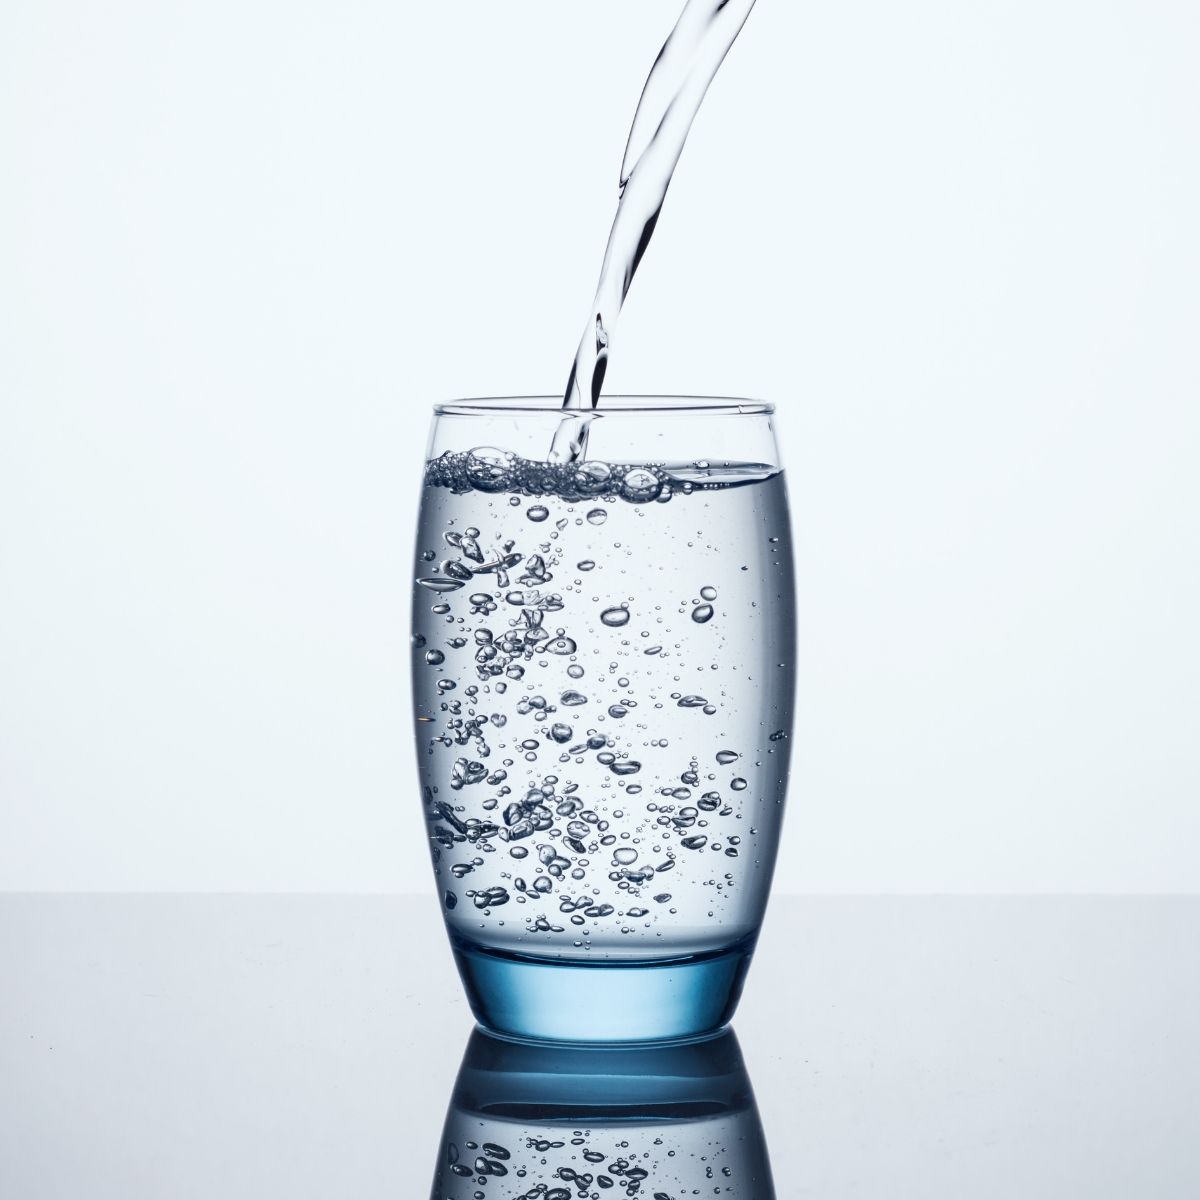 Whay water after massage is important for improved results illustrated by a glass of fresh water being poured.